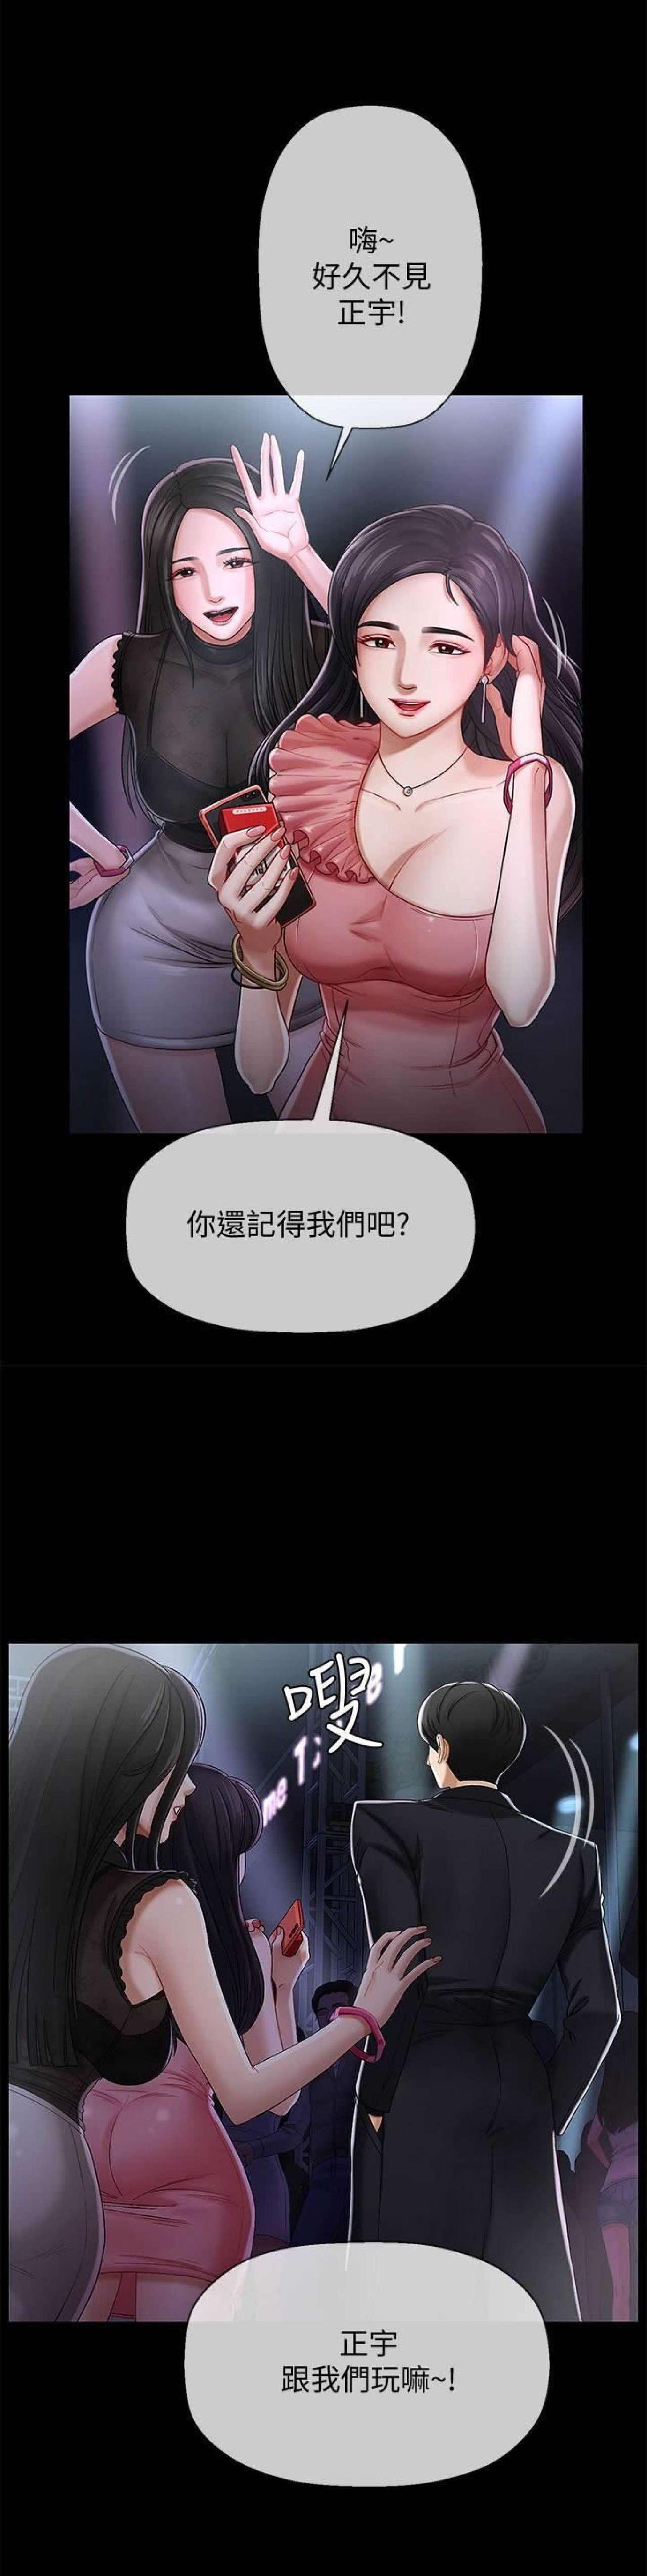 Pickup 坏老师 | PHYSICAL CLASSROOM 2 18yearsold - Page 2